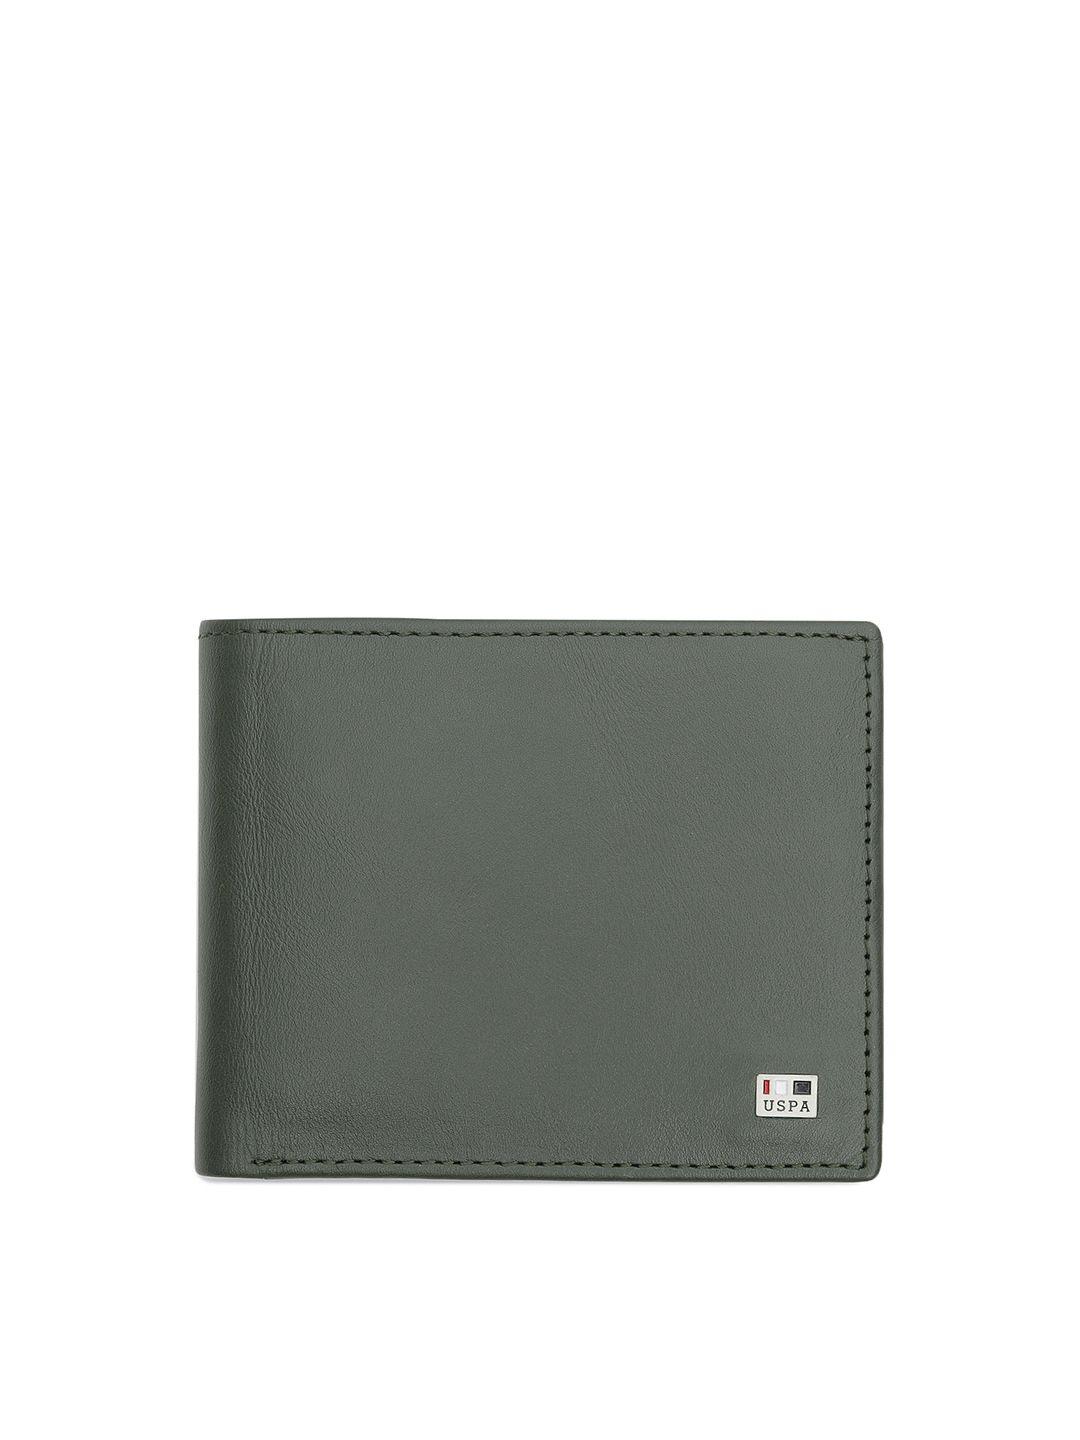 u-s-polo-assn-men-olive-green-leather-two-fold-wallet